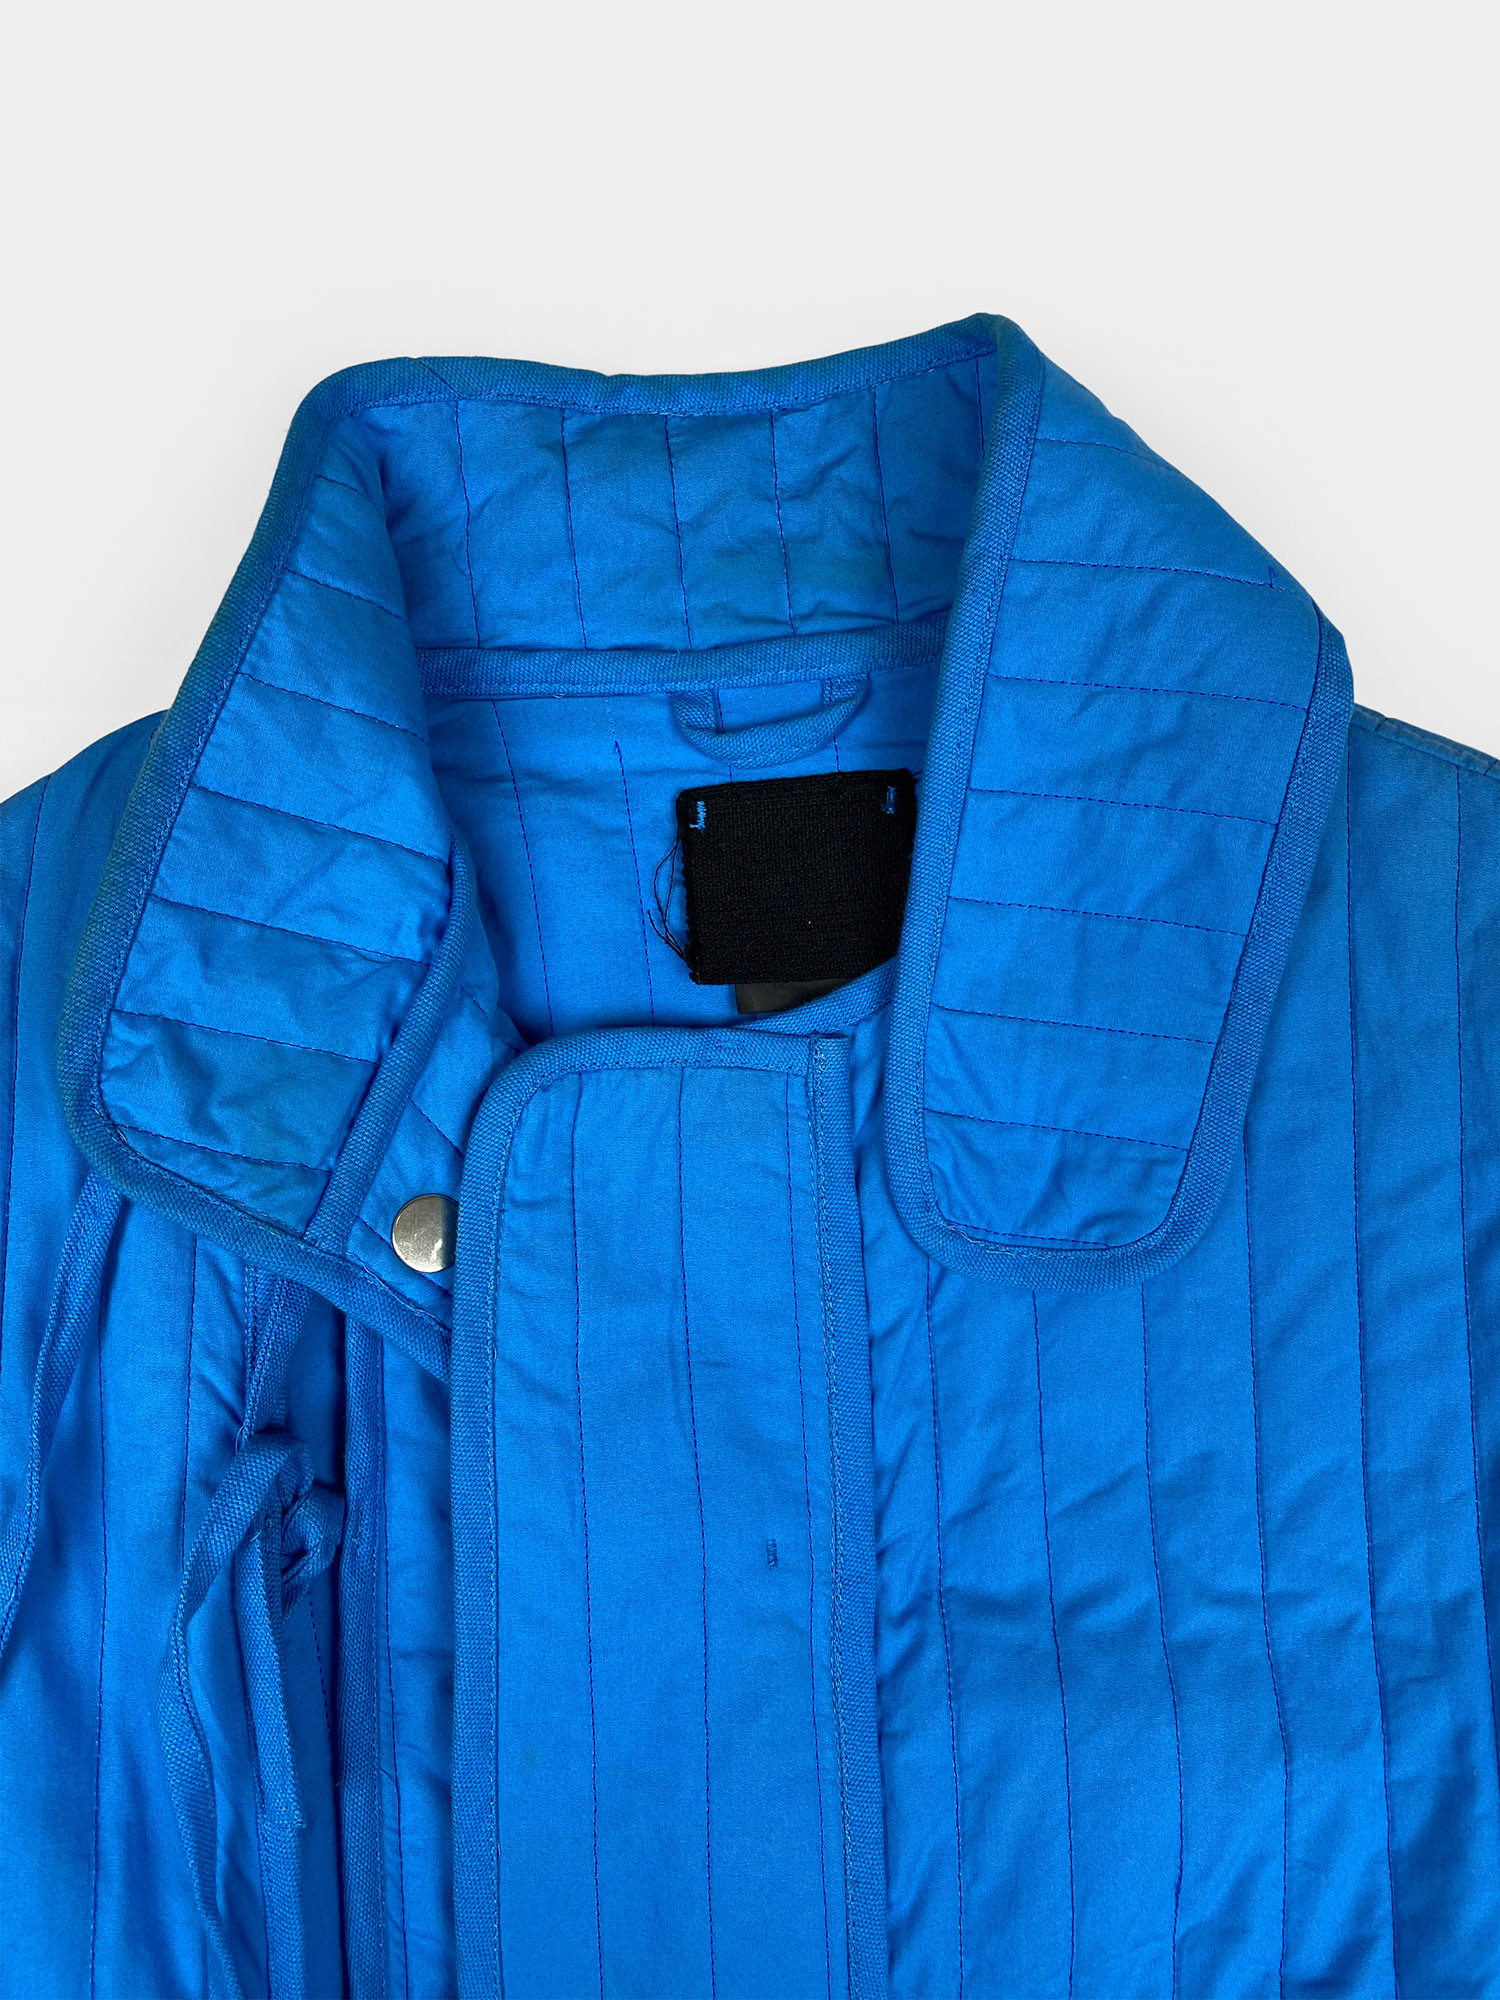 CRAIG GREEN SS15 Blue Parachute Jacket - ARCHIVED